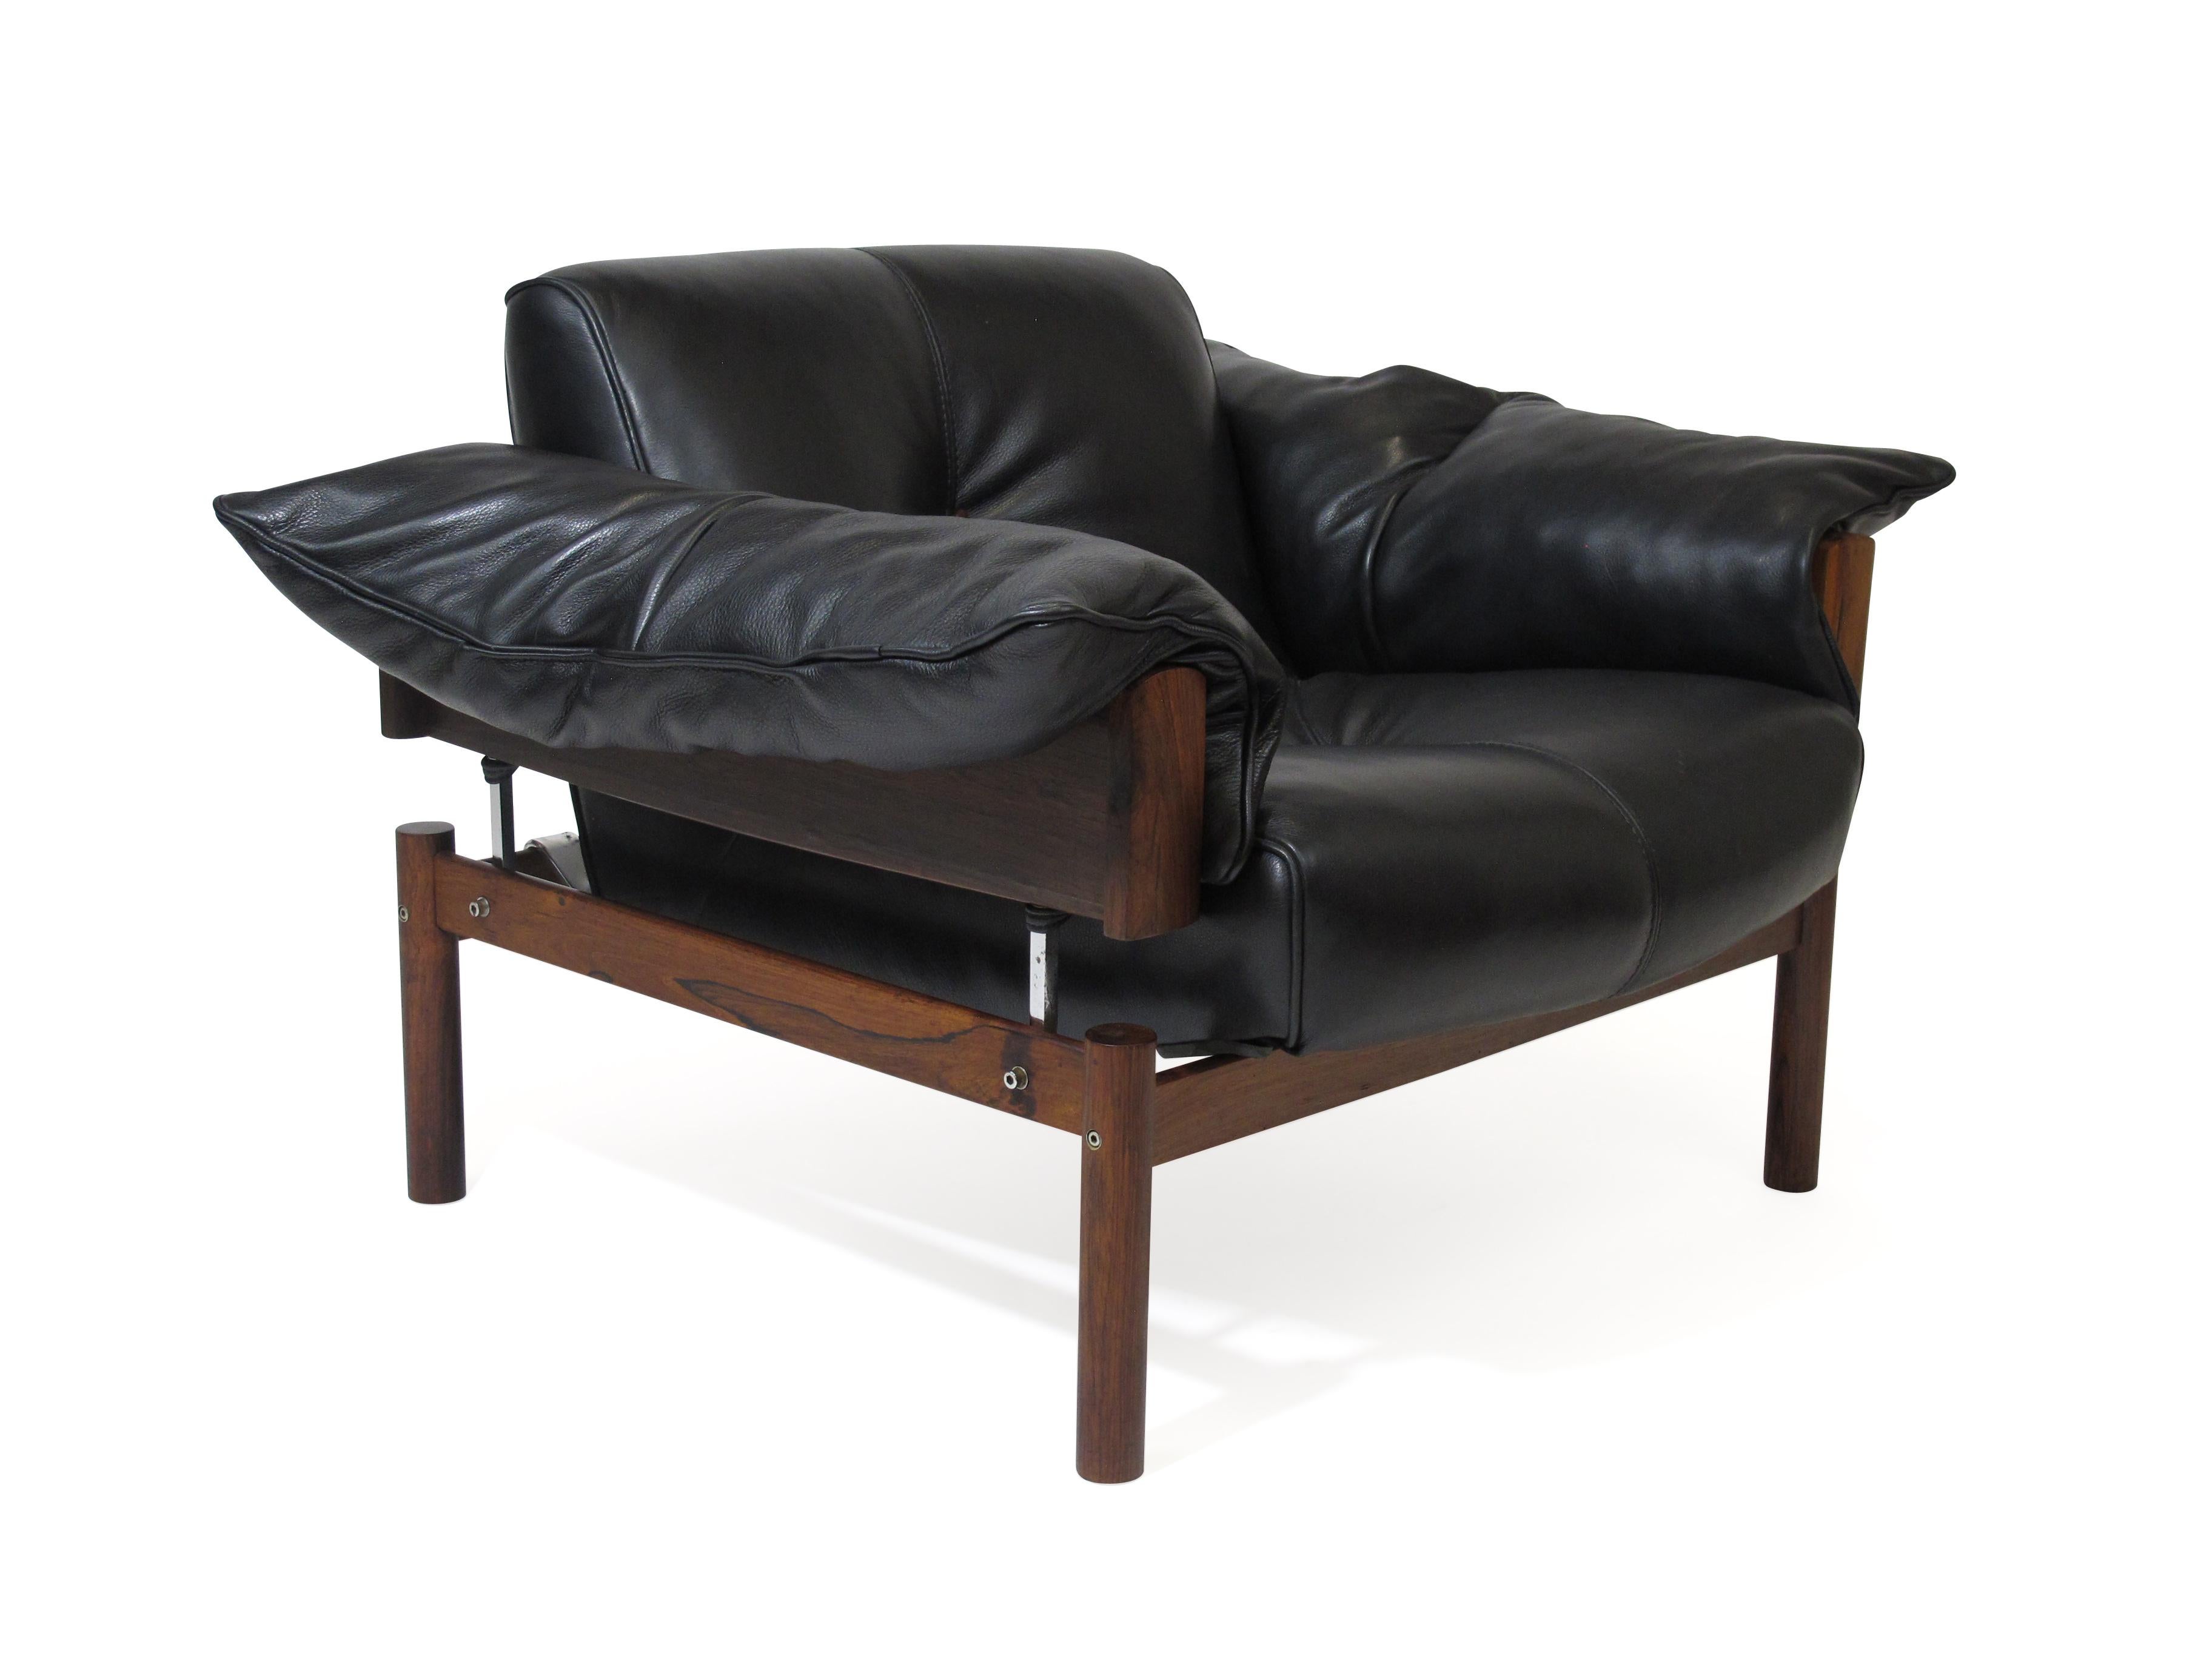 1960 Percival Lafer Brazilian Rosewood Sofa and Chair in Black Leather 1